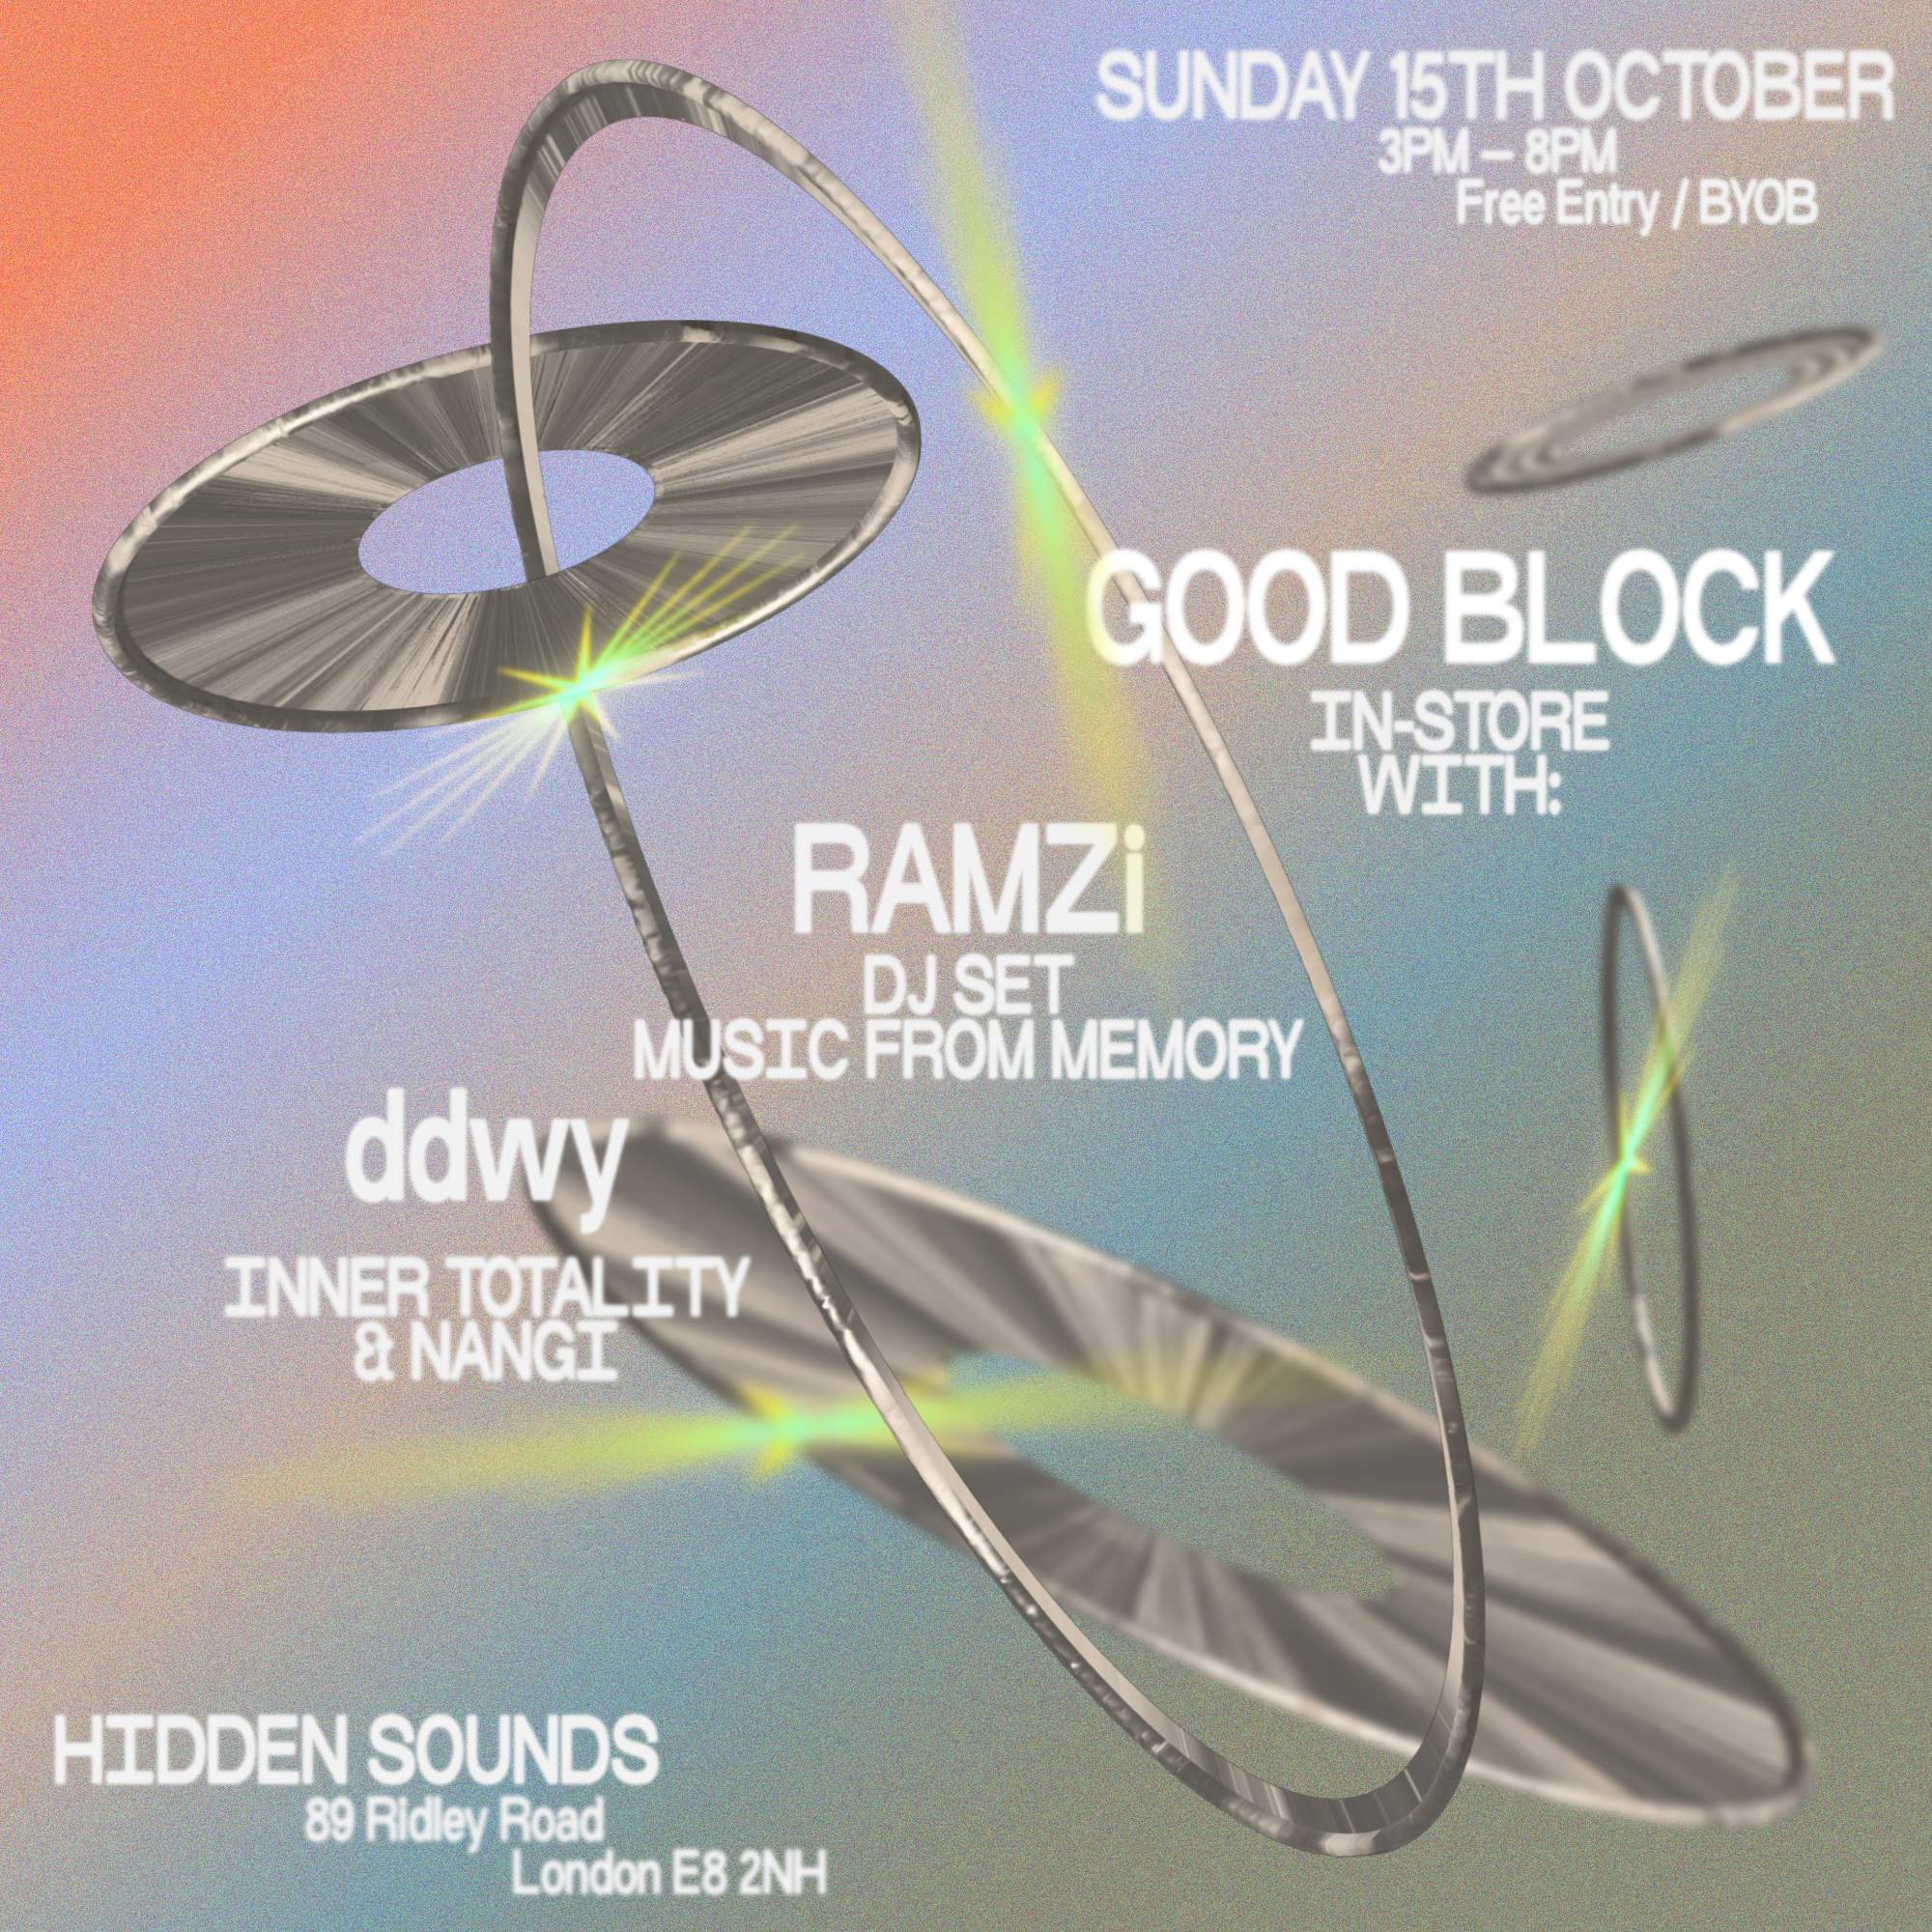 Good Block with RAMZi and ddwy (Inner Totality & Nangi) - Página frontal